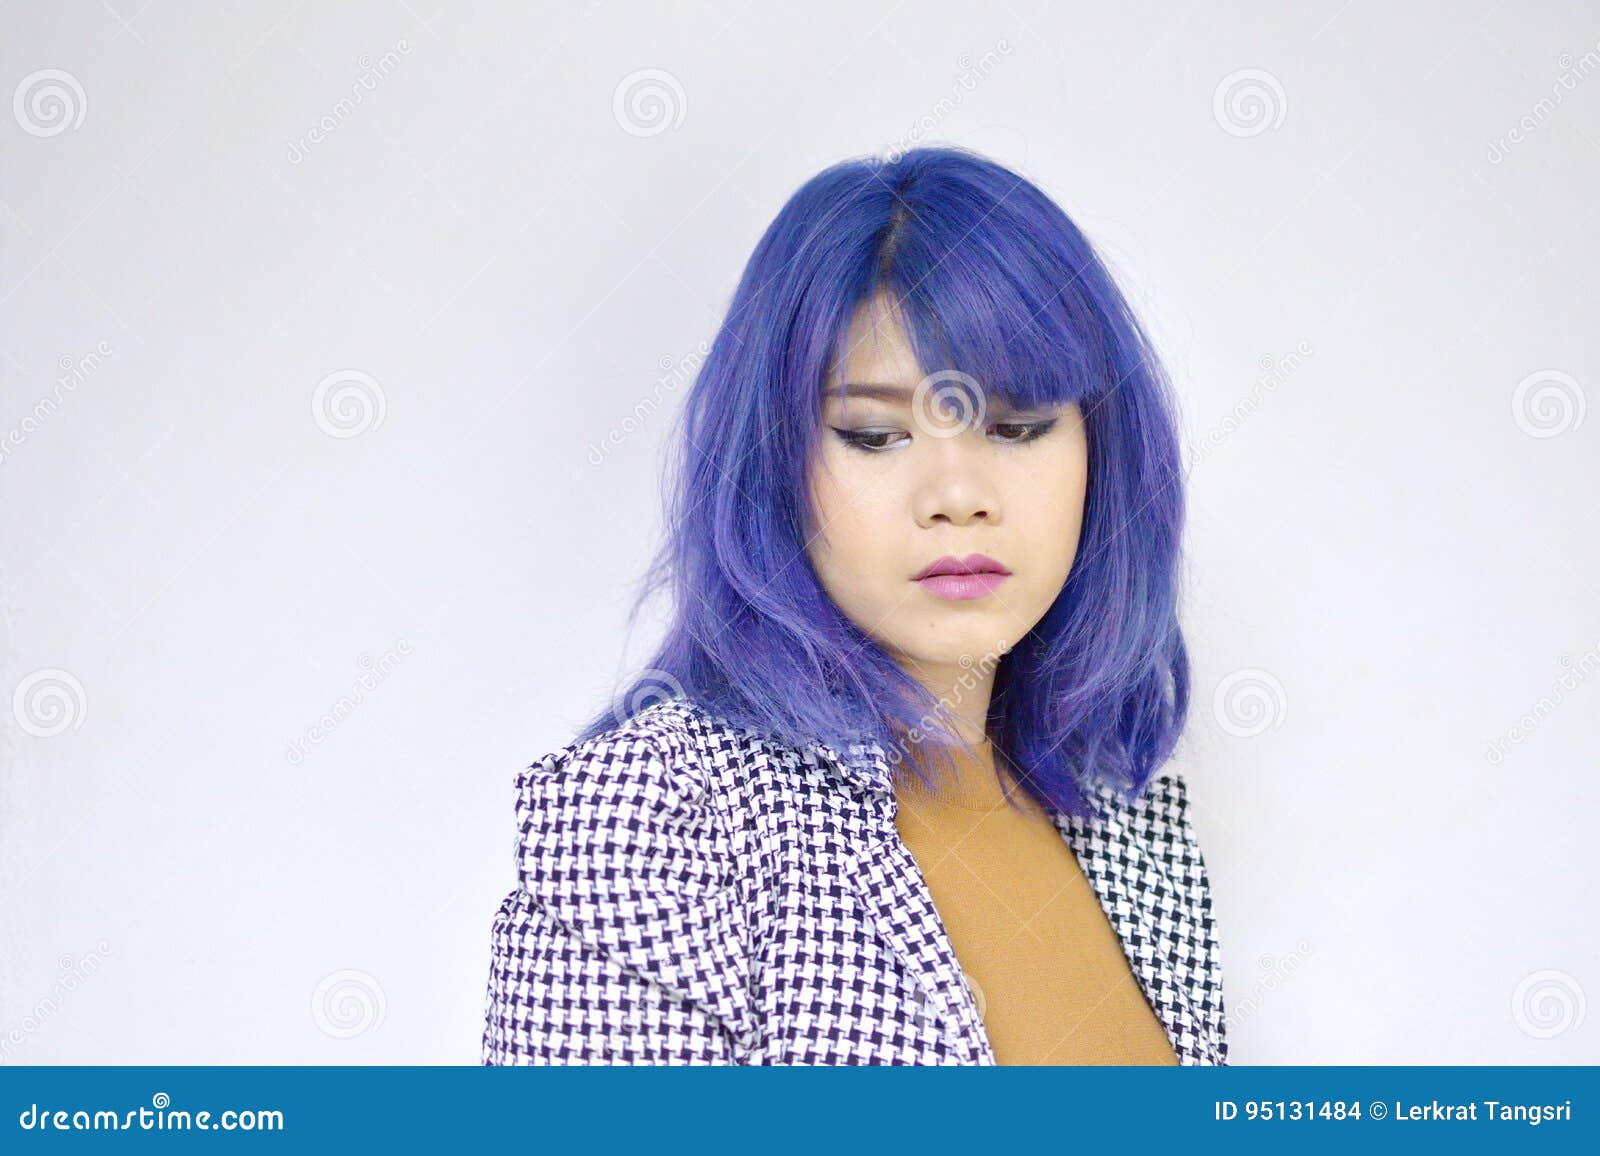 3. "How to Achieve Blue Hair for Asian Hair Types" - wide 3